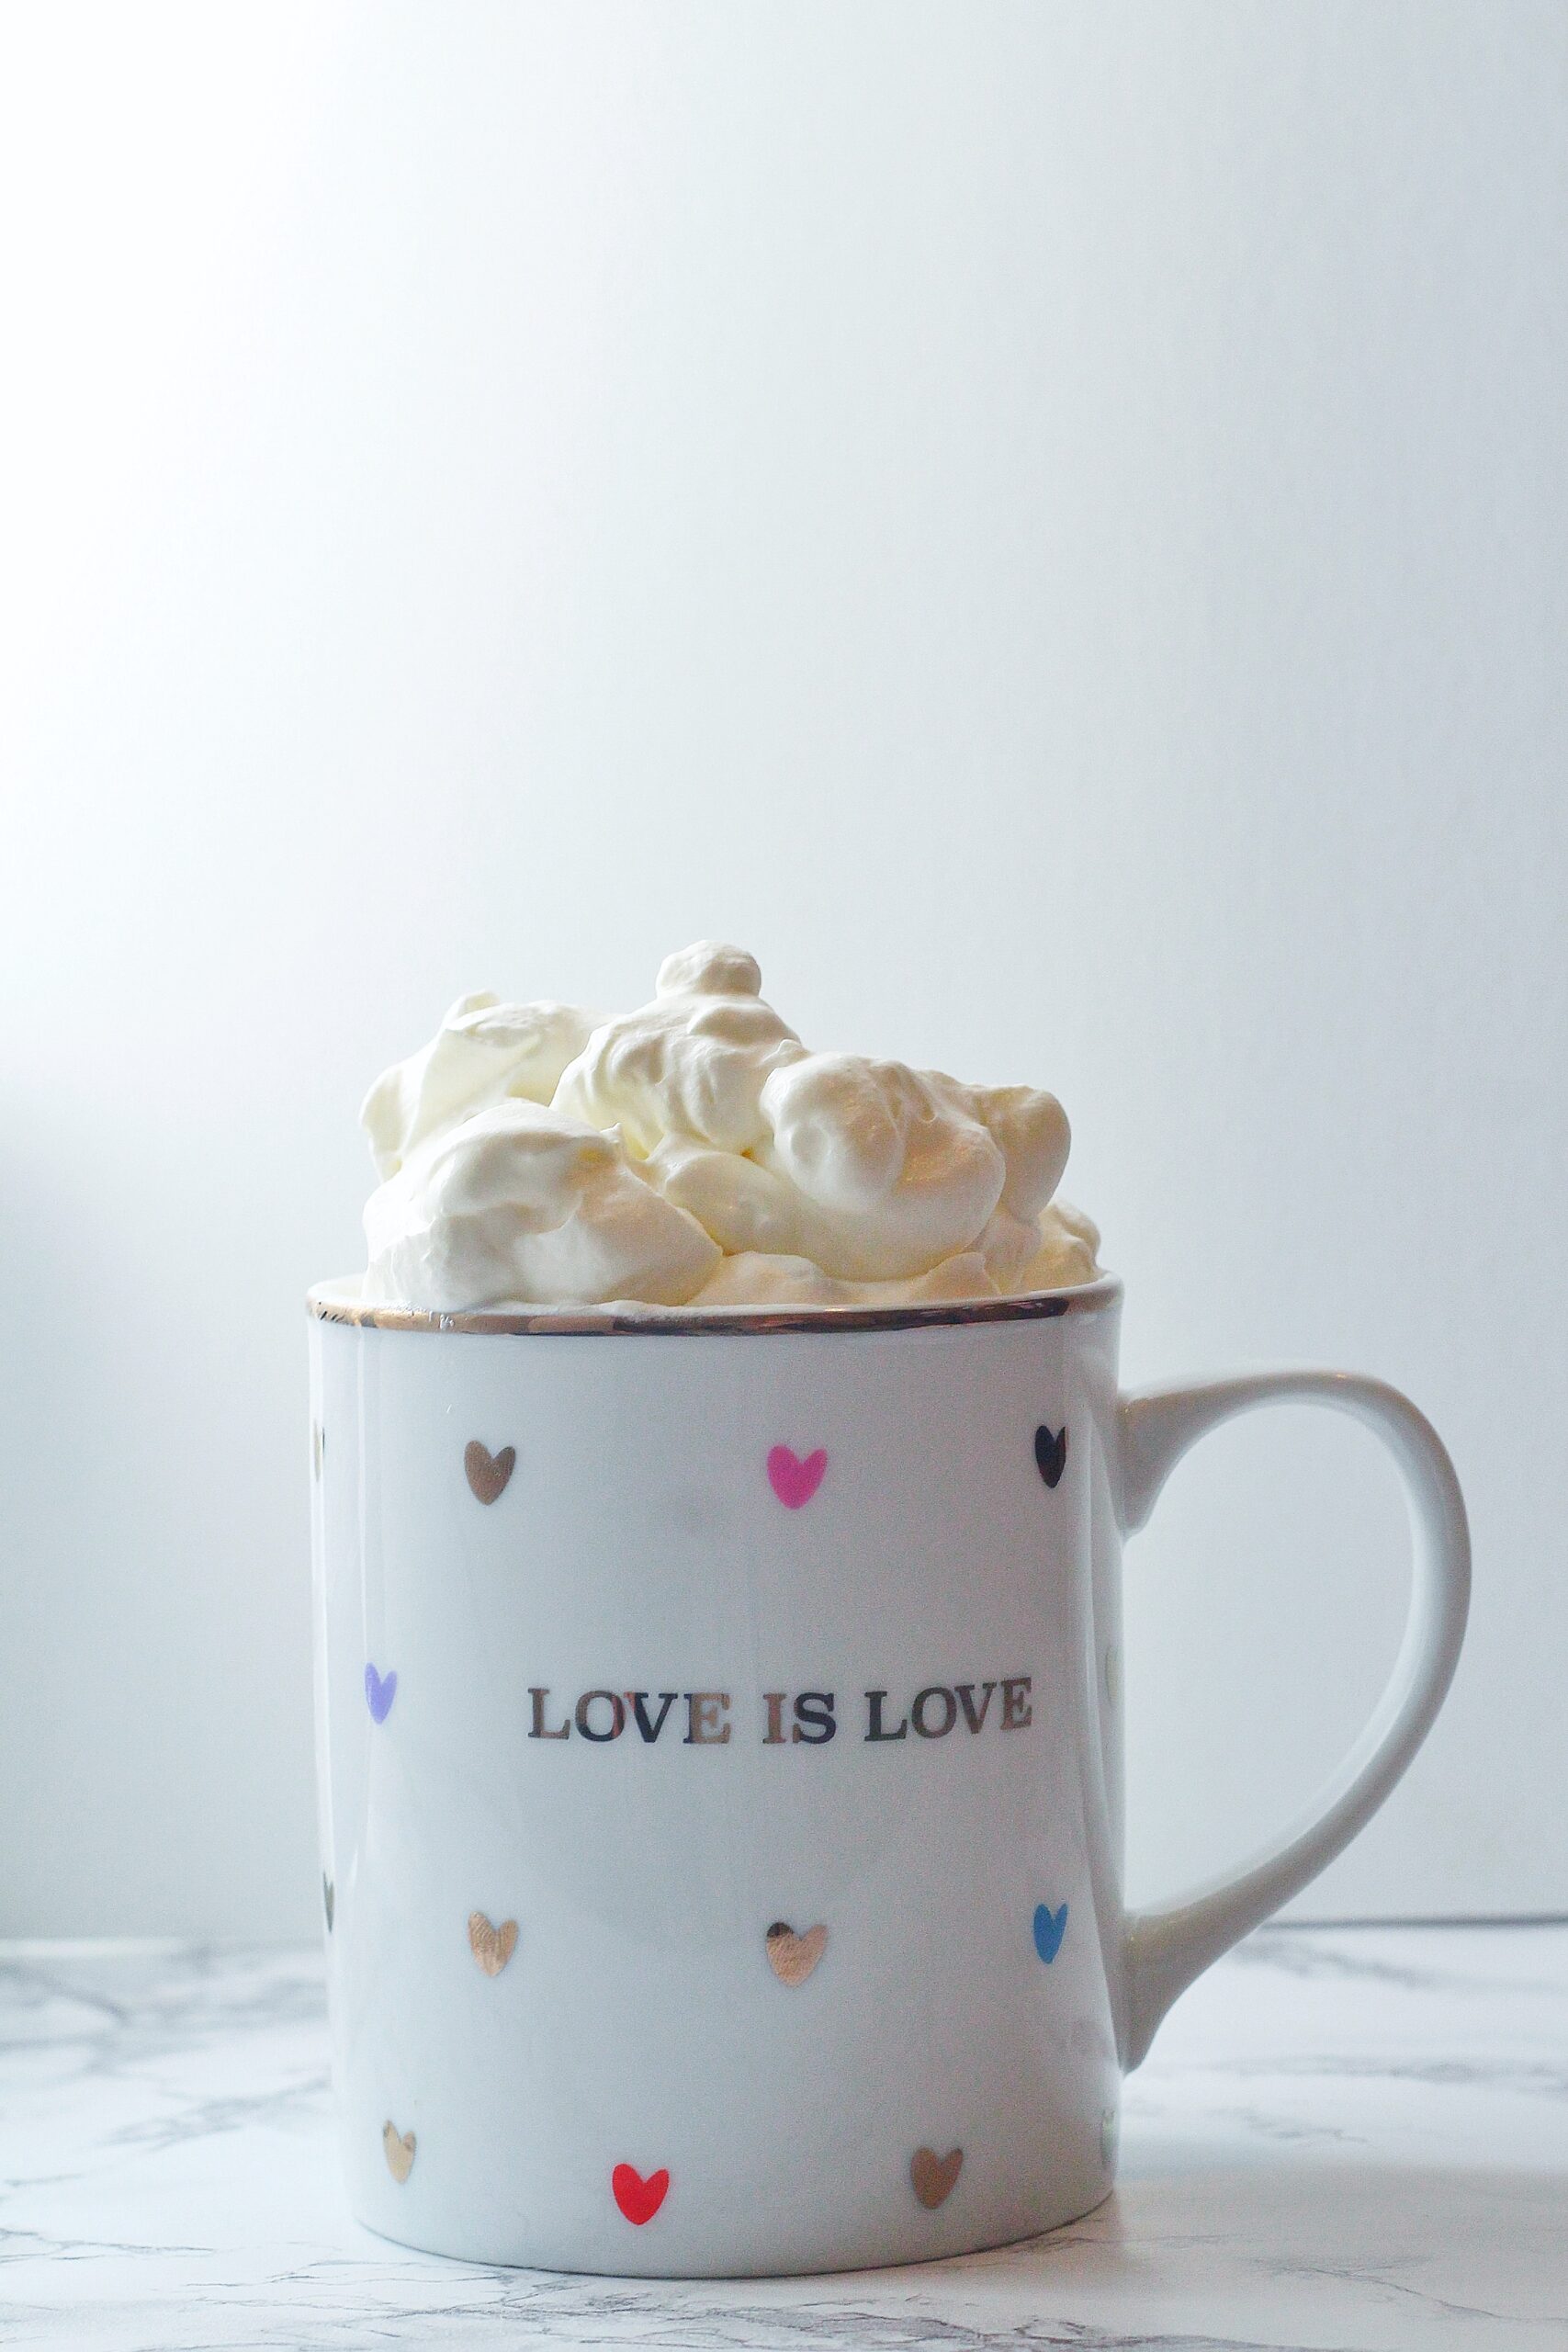 A white mug with a gold rim covered in multi-colored hearts that says love is love on the front with Bailey's whipped cream sitting on top